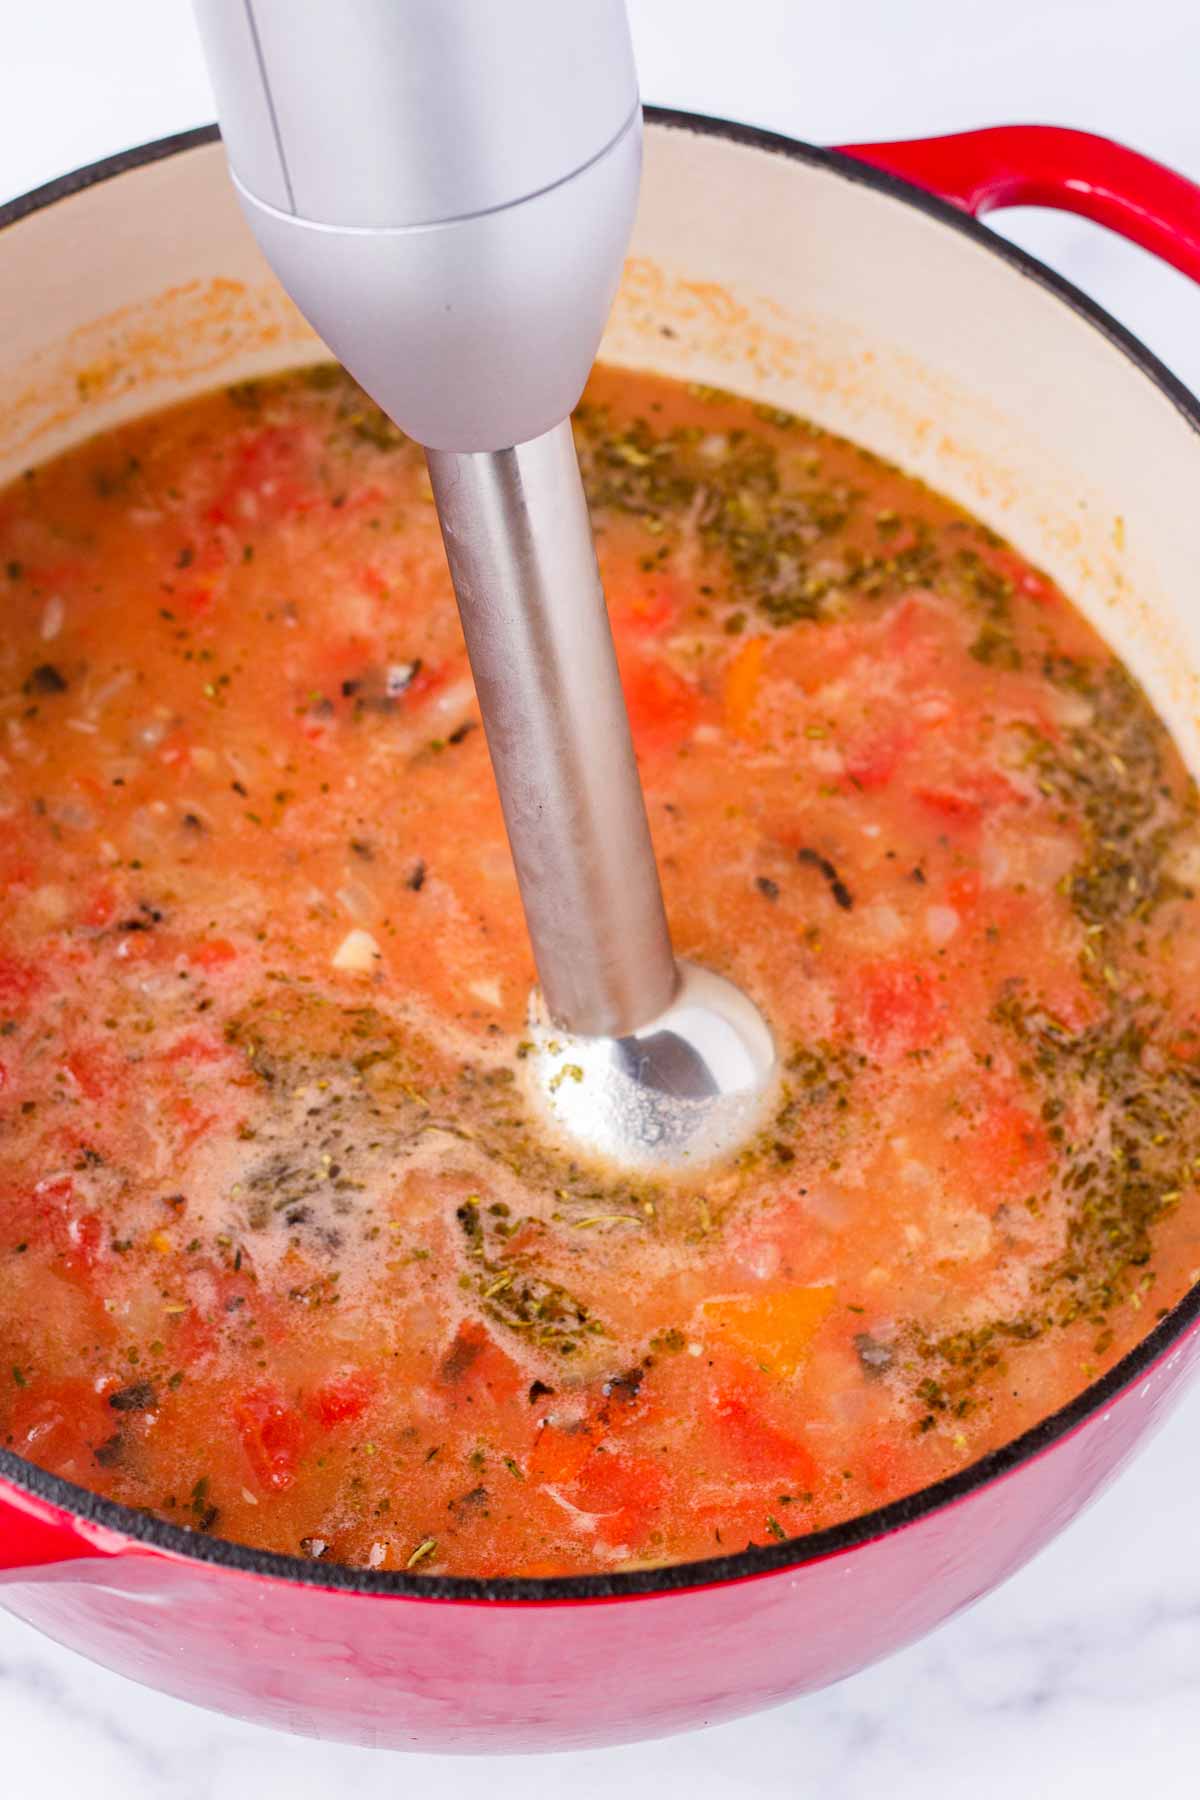 blending soup with an immersion blender